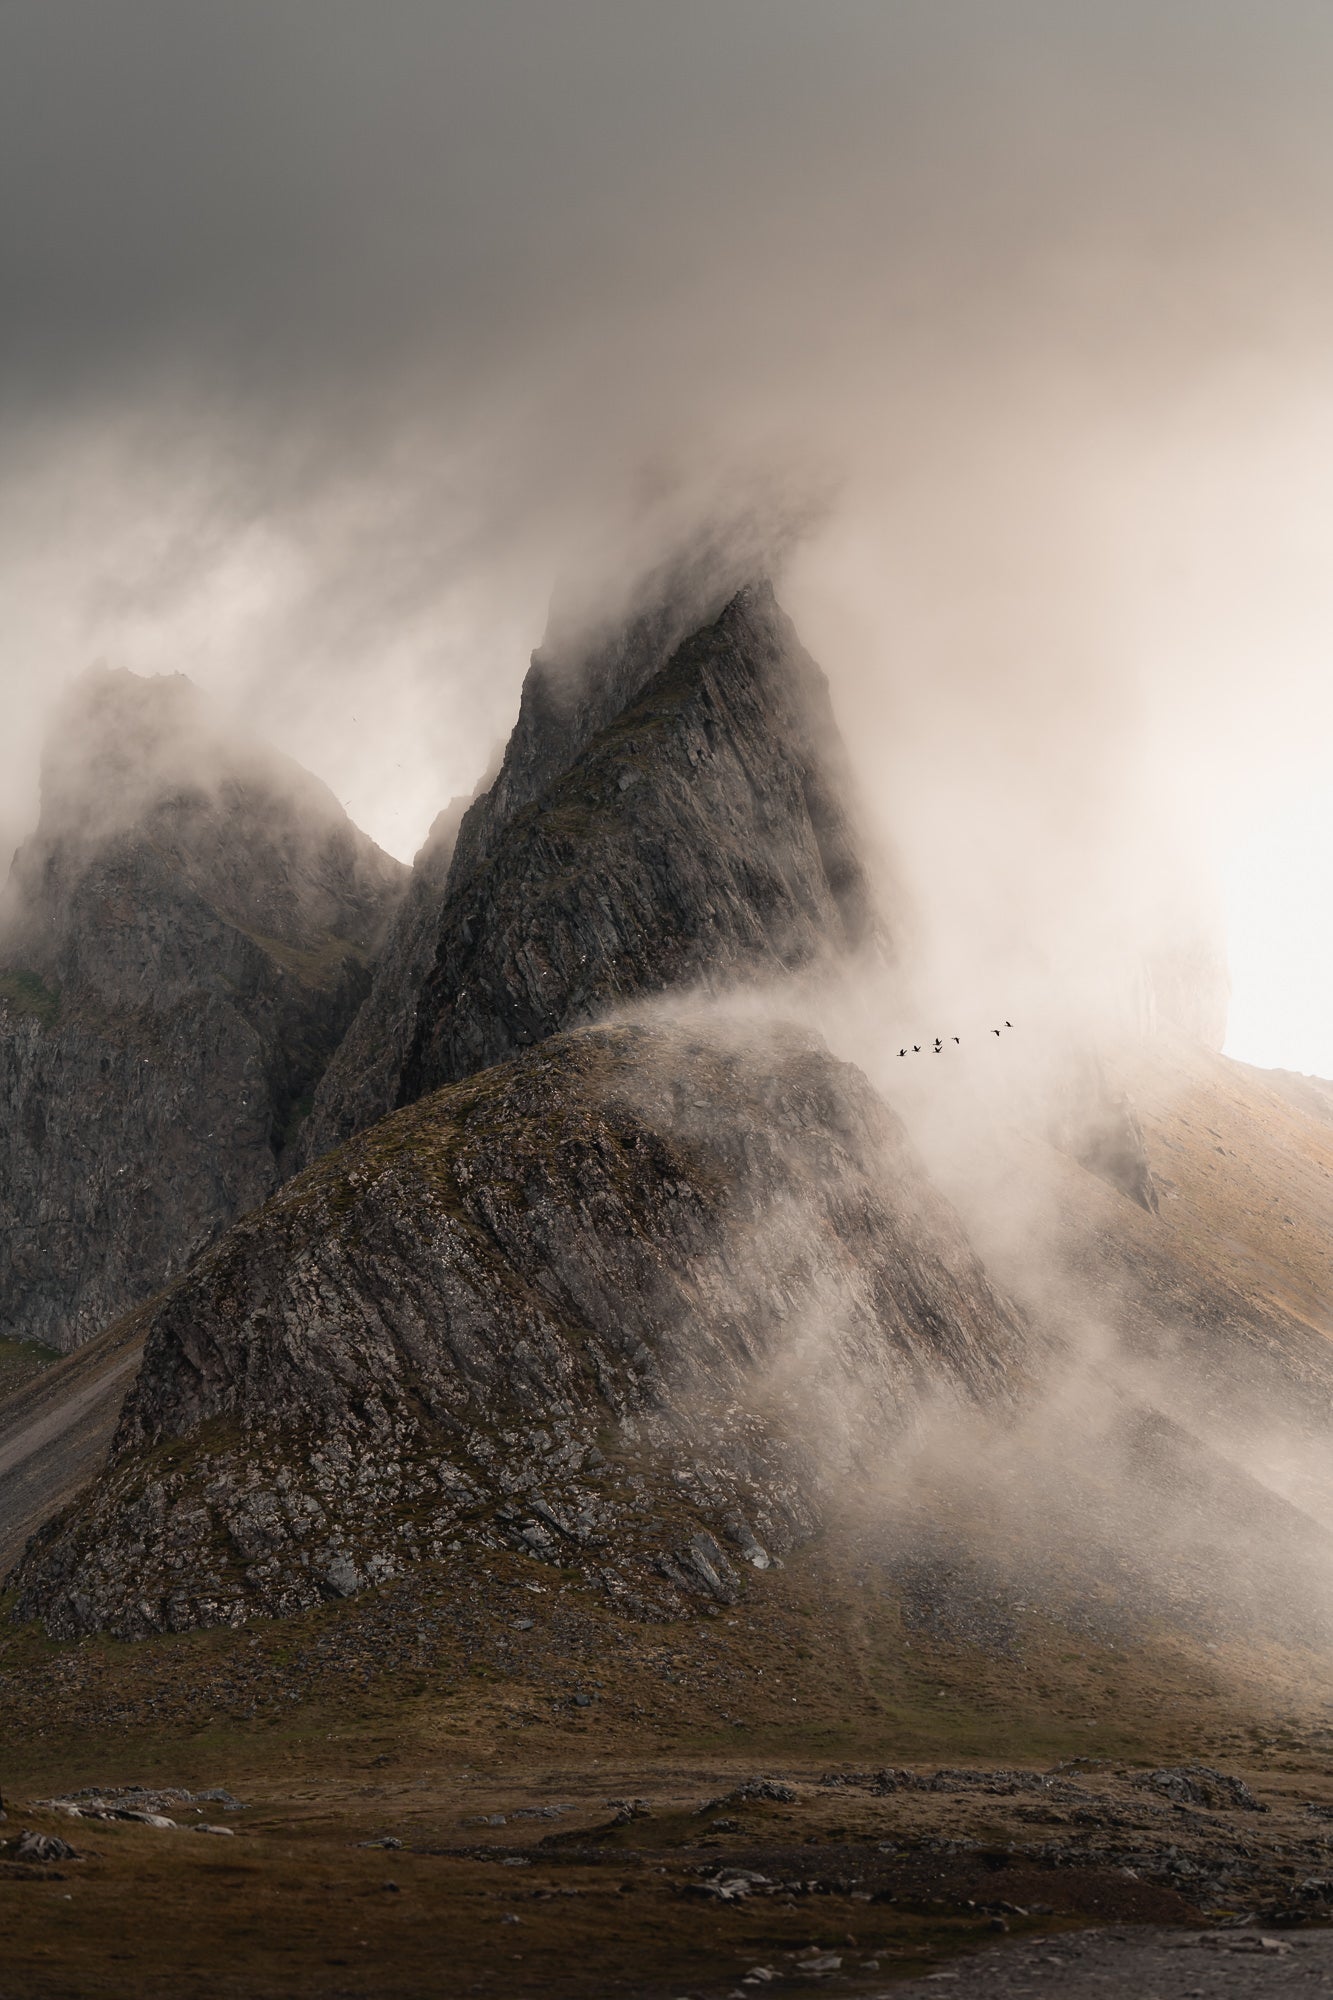 “Eystrahorn Geese, a rare moment with a flock of geese flying past an Icelandic mountain range.” Photo by Daryl Scott Walker. Sony Alpha 7 III. Sony 70-200mm f/4 G. 1/500-sec, f/4, ISO 1000